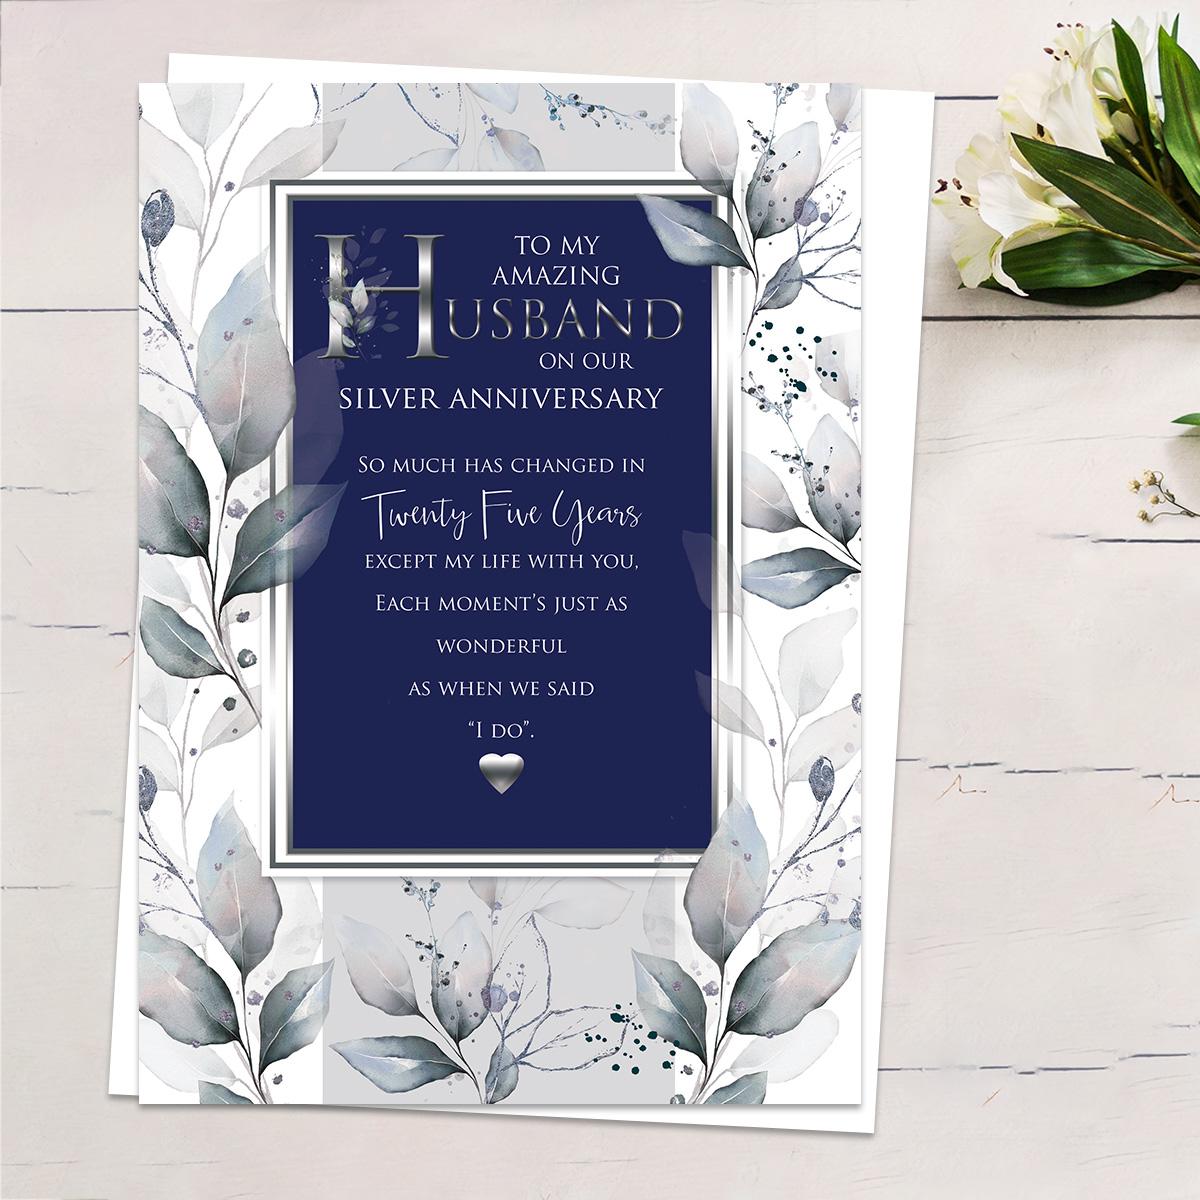 'To My Amazing Husband On Our Silver Anniversary' Card Showing A Border Of Leaves Around A Navy Rectangle With Gold Foiled Edge. Heartfelt Words And White Envelope